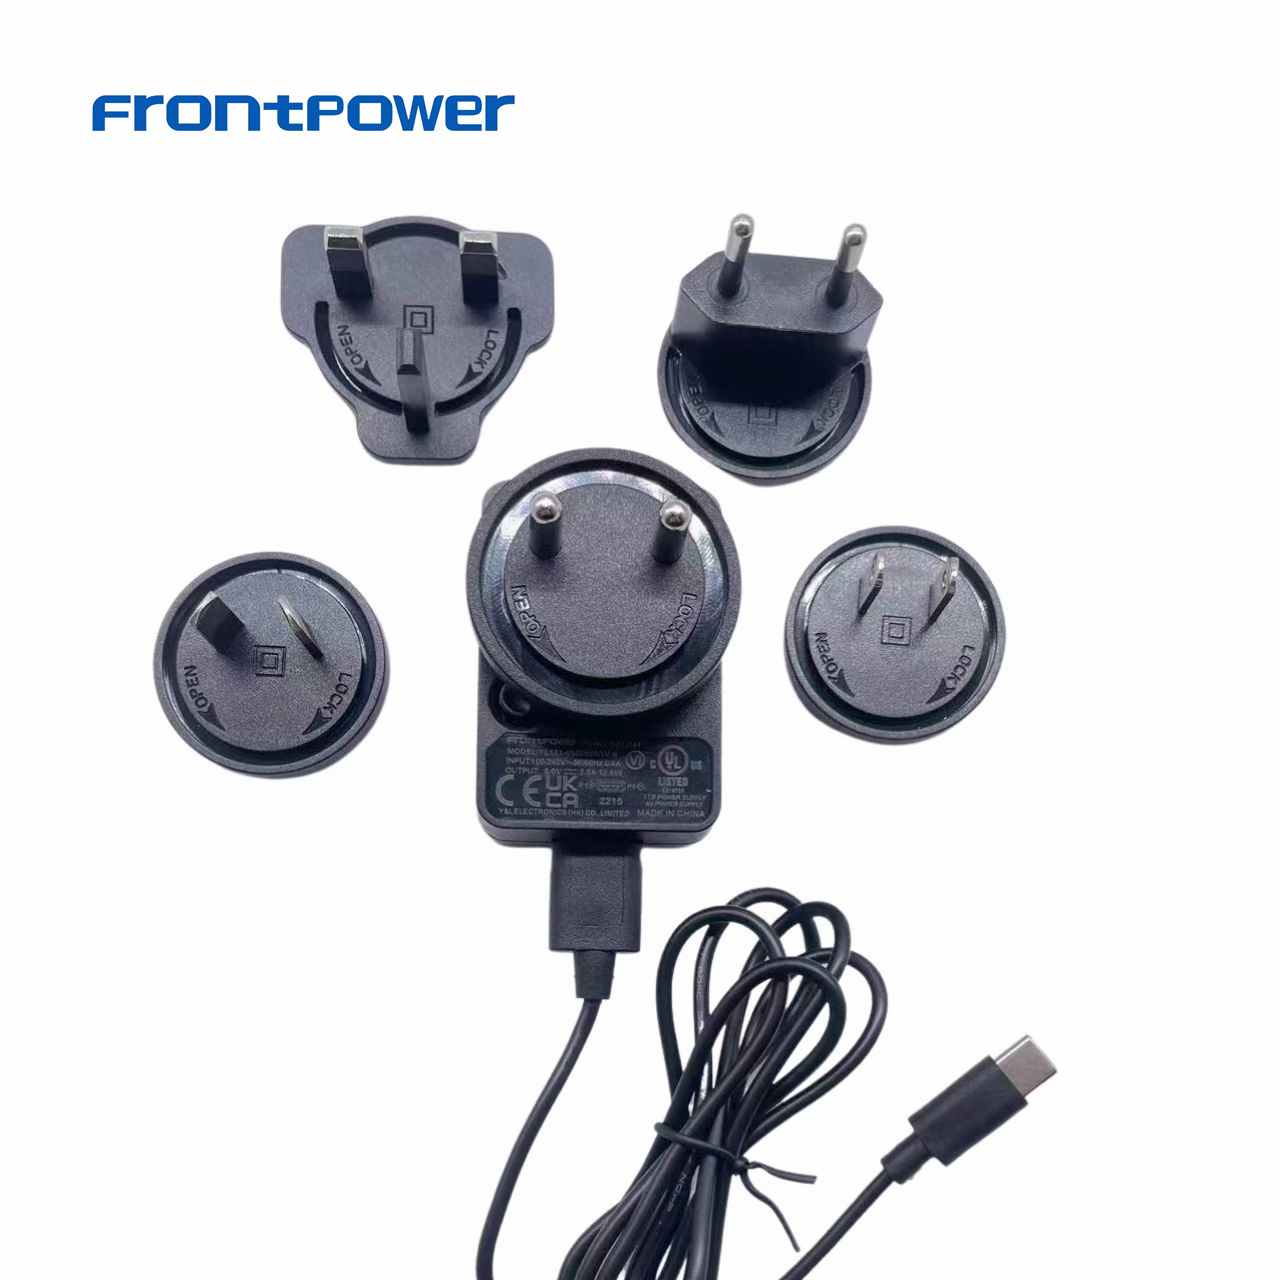 5V 2.5A 3A detachable type power adapter with US/UK/EU/AU/IN plug with BIS UL UKCA CE GS SAA certification